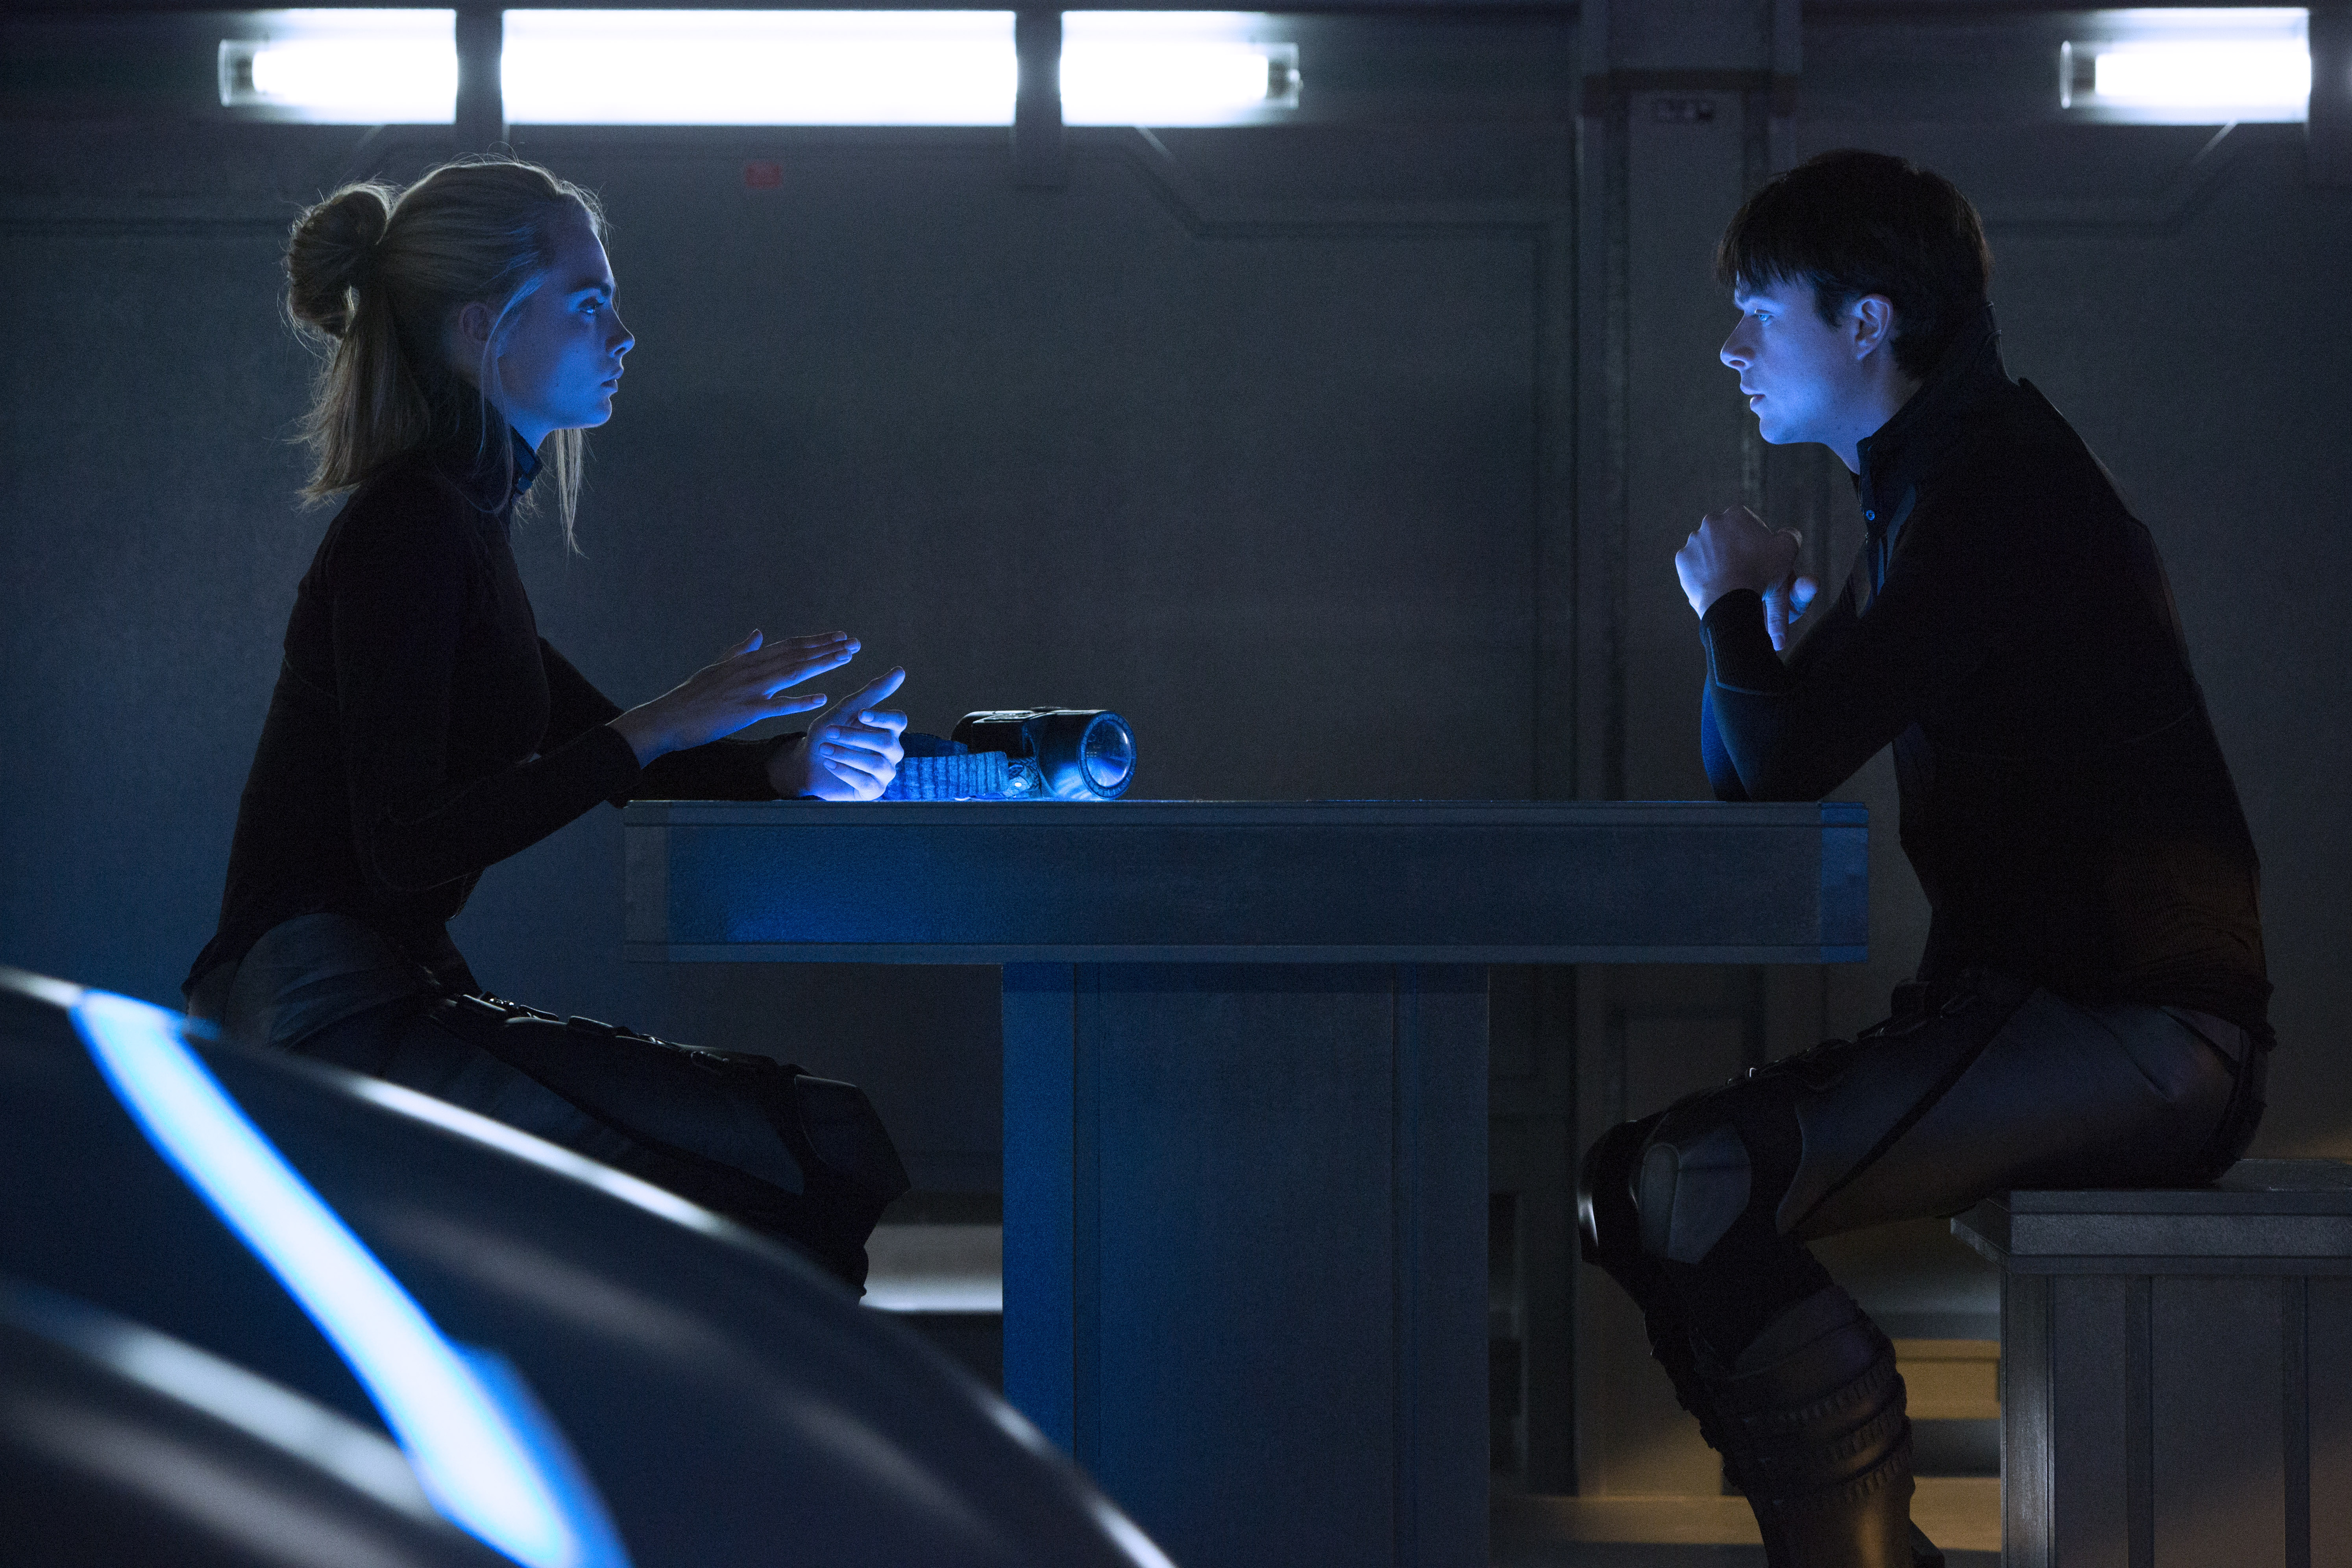 Valerian And The City Of A Thousand Planets Cara Delevingne Dane DeHaan 5976x3984